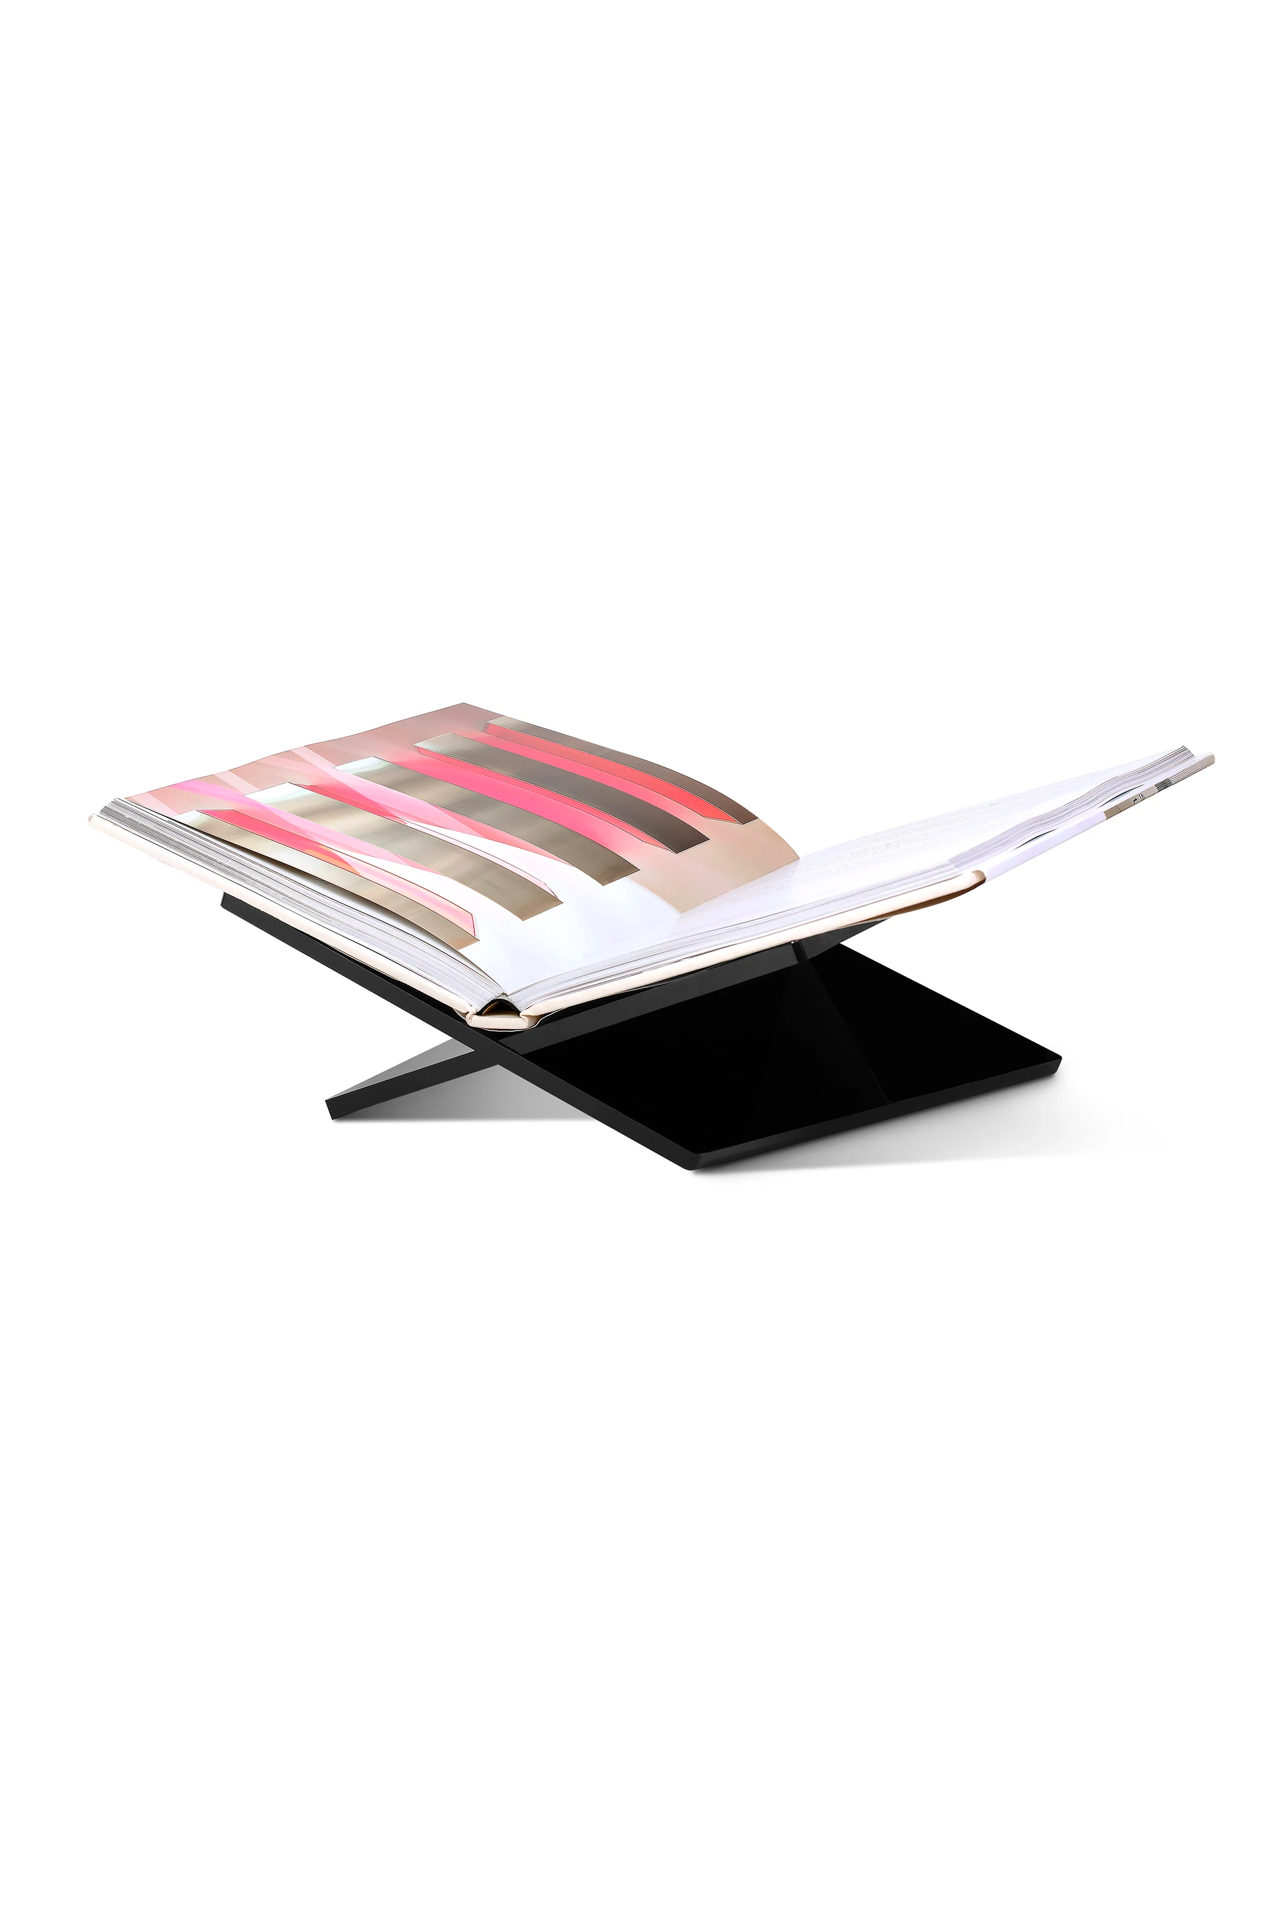 Assouline A Bookstand Black with a Book Image (6637675905139)